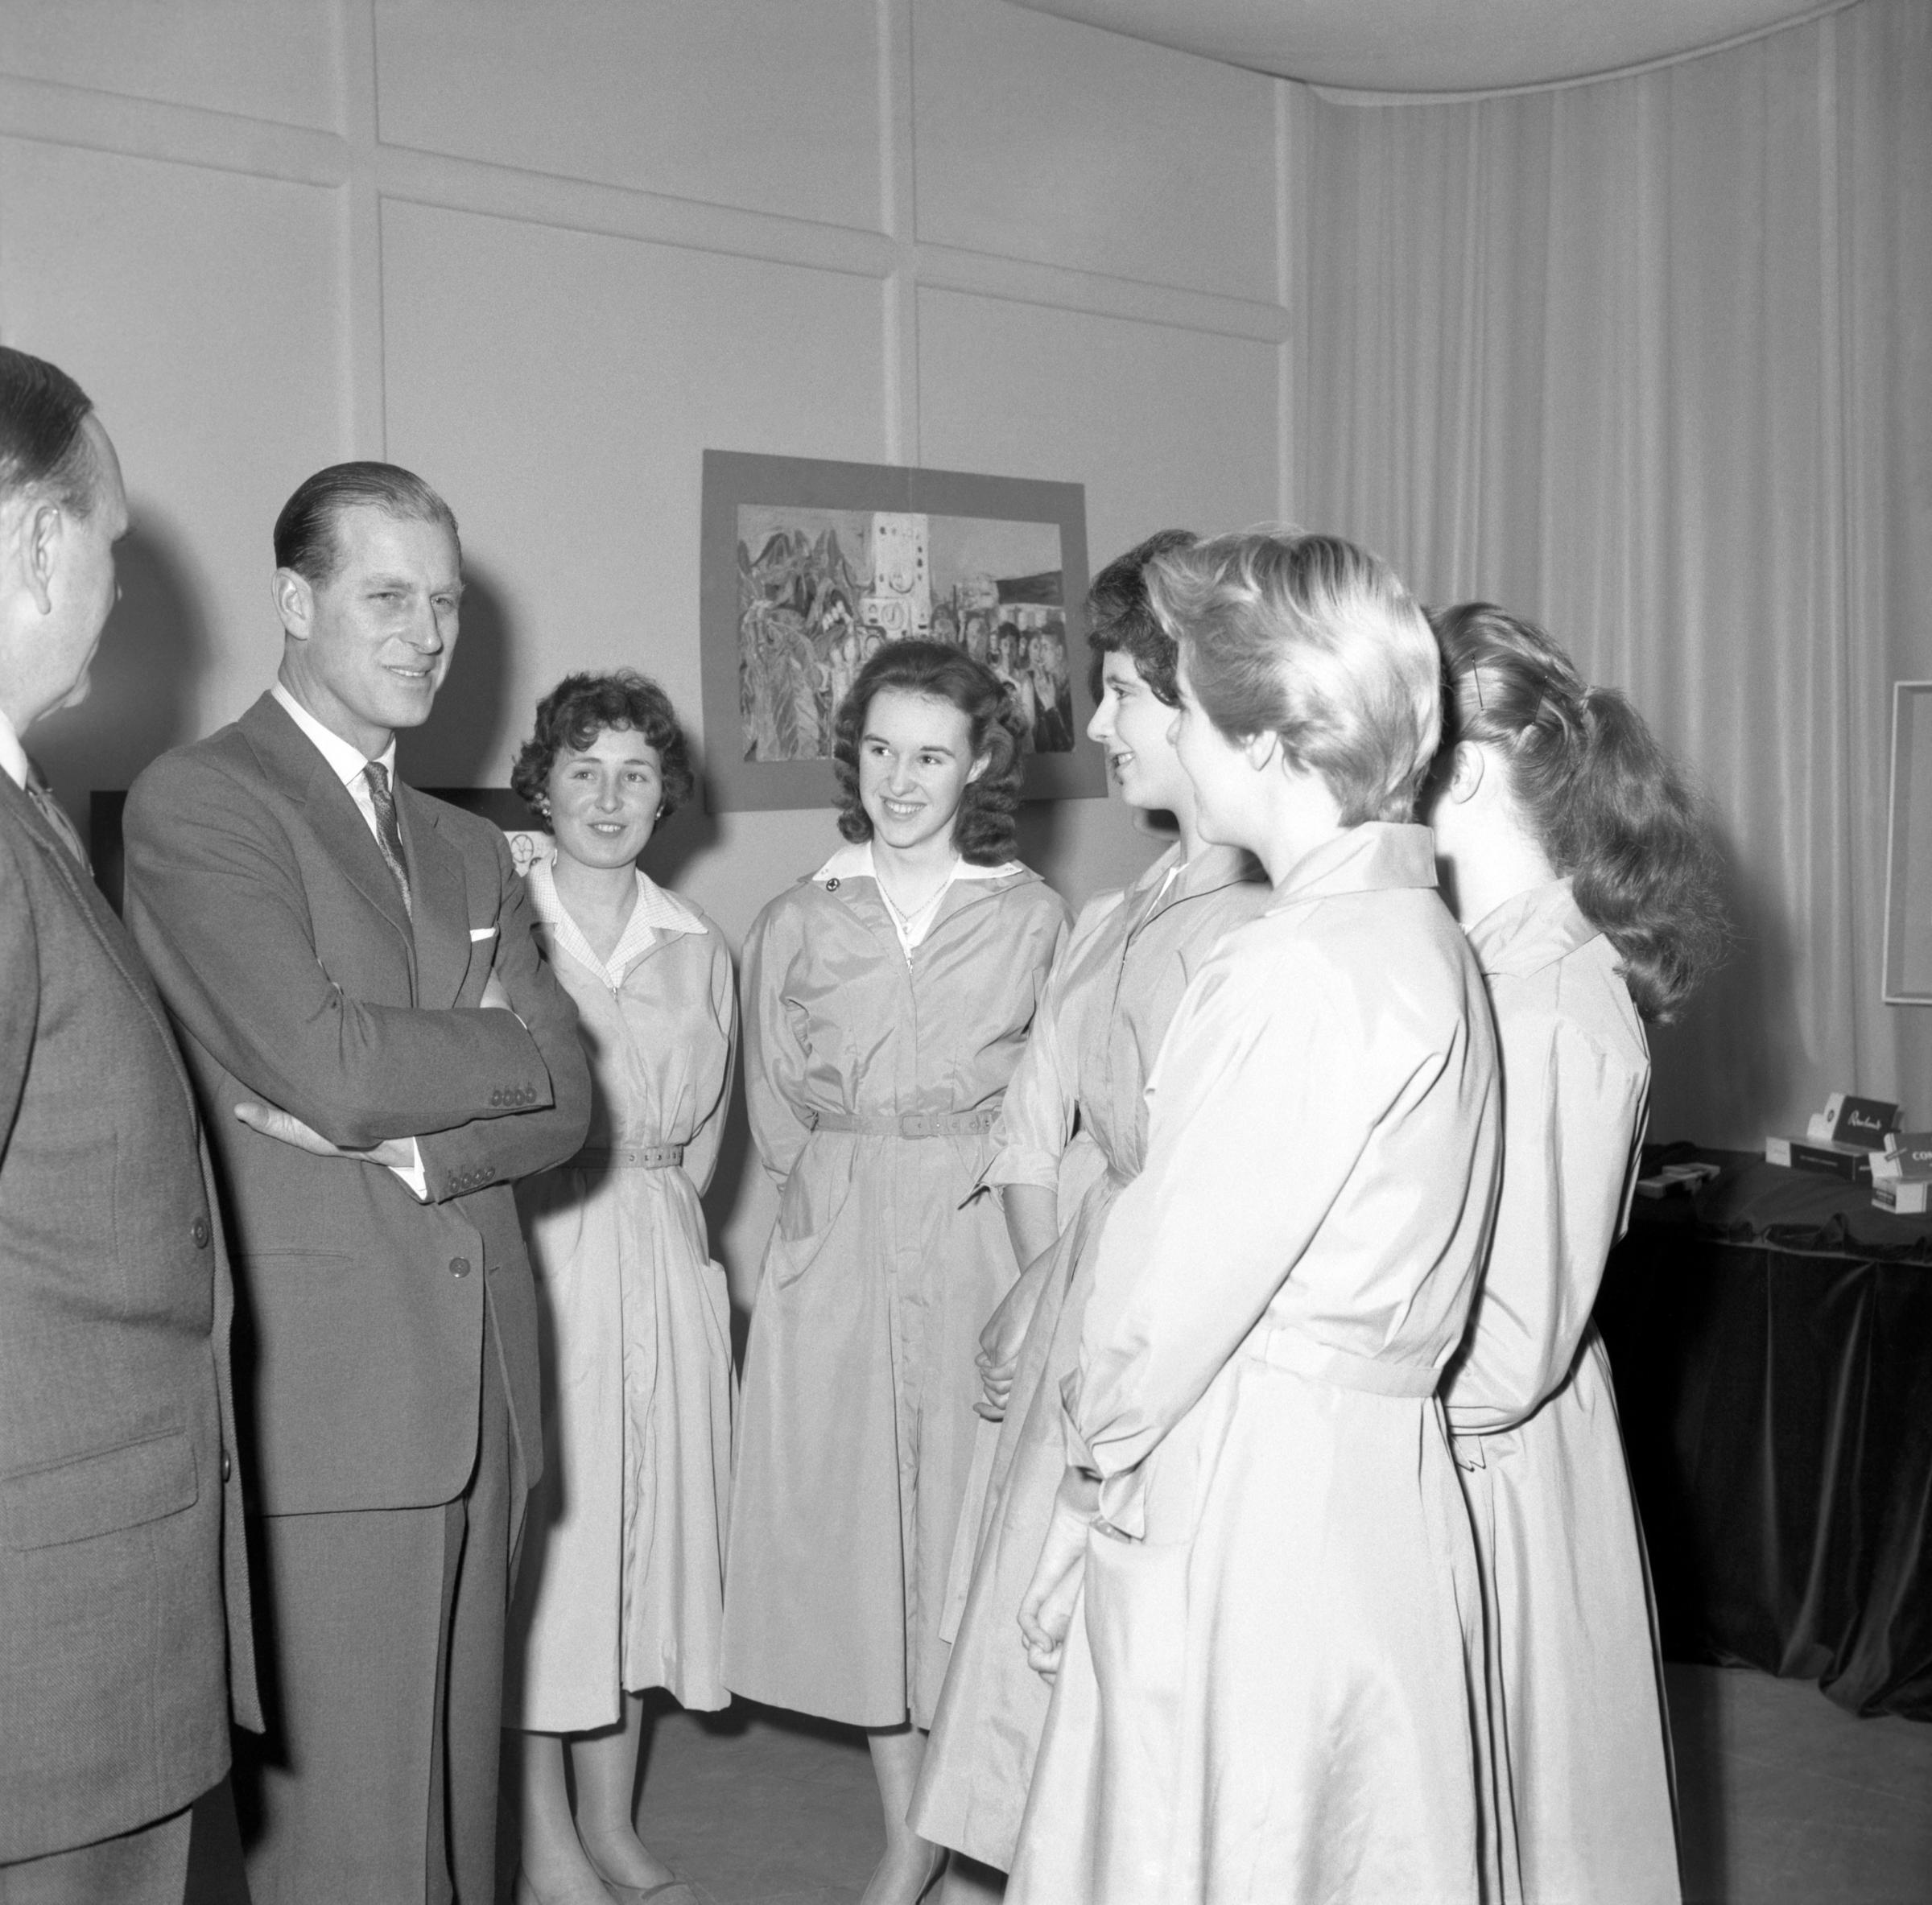 Prince Philip, The Duke of Edinburgh chats to some of the girls who work at the Carreras Tobacco Factory at Basildon in Essex during his visit to the premises..